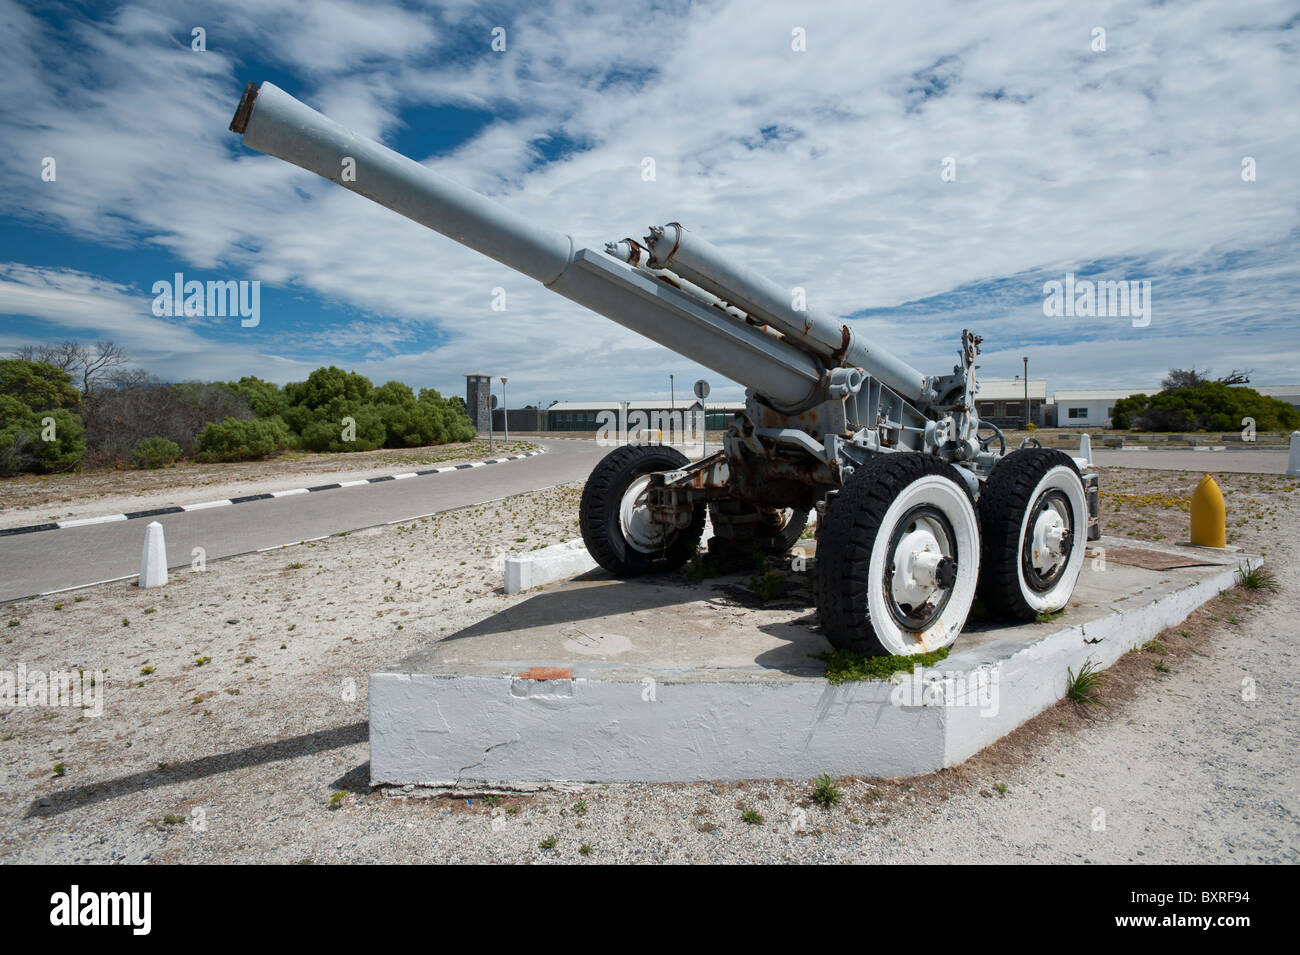 WW2 Howitzer Artillery Gun at the Main Entrance to Robben Island Maximum Security Prison, Cape Town, South Africa Stock Photo